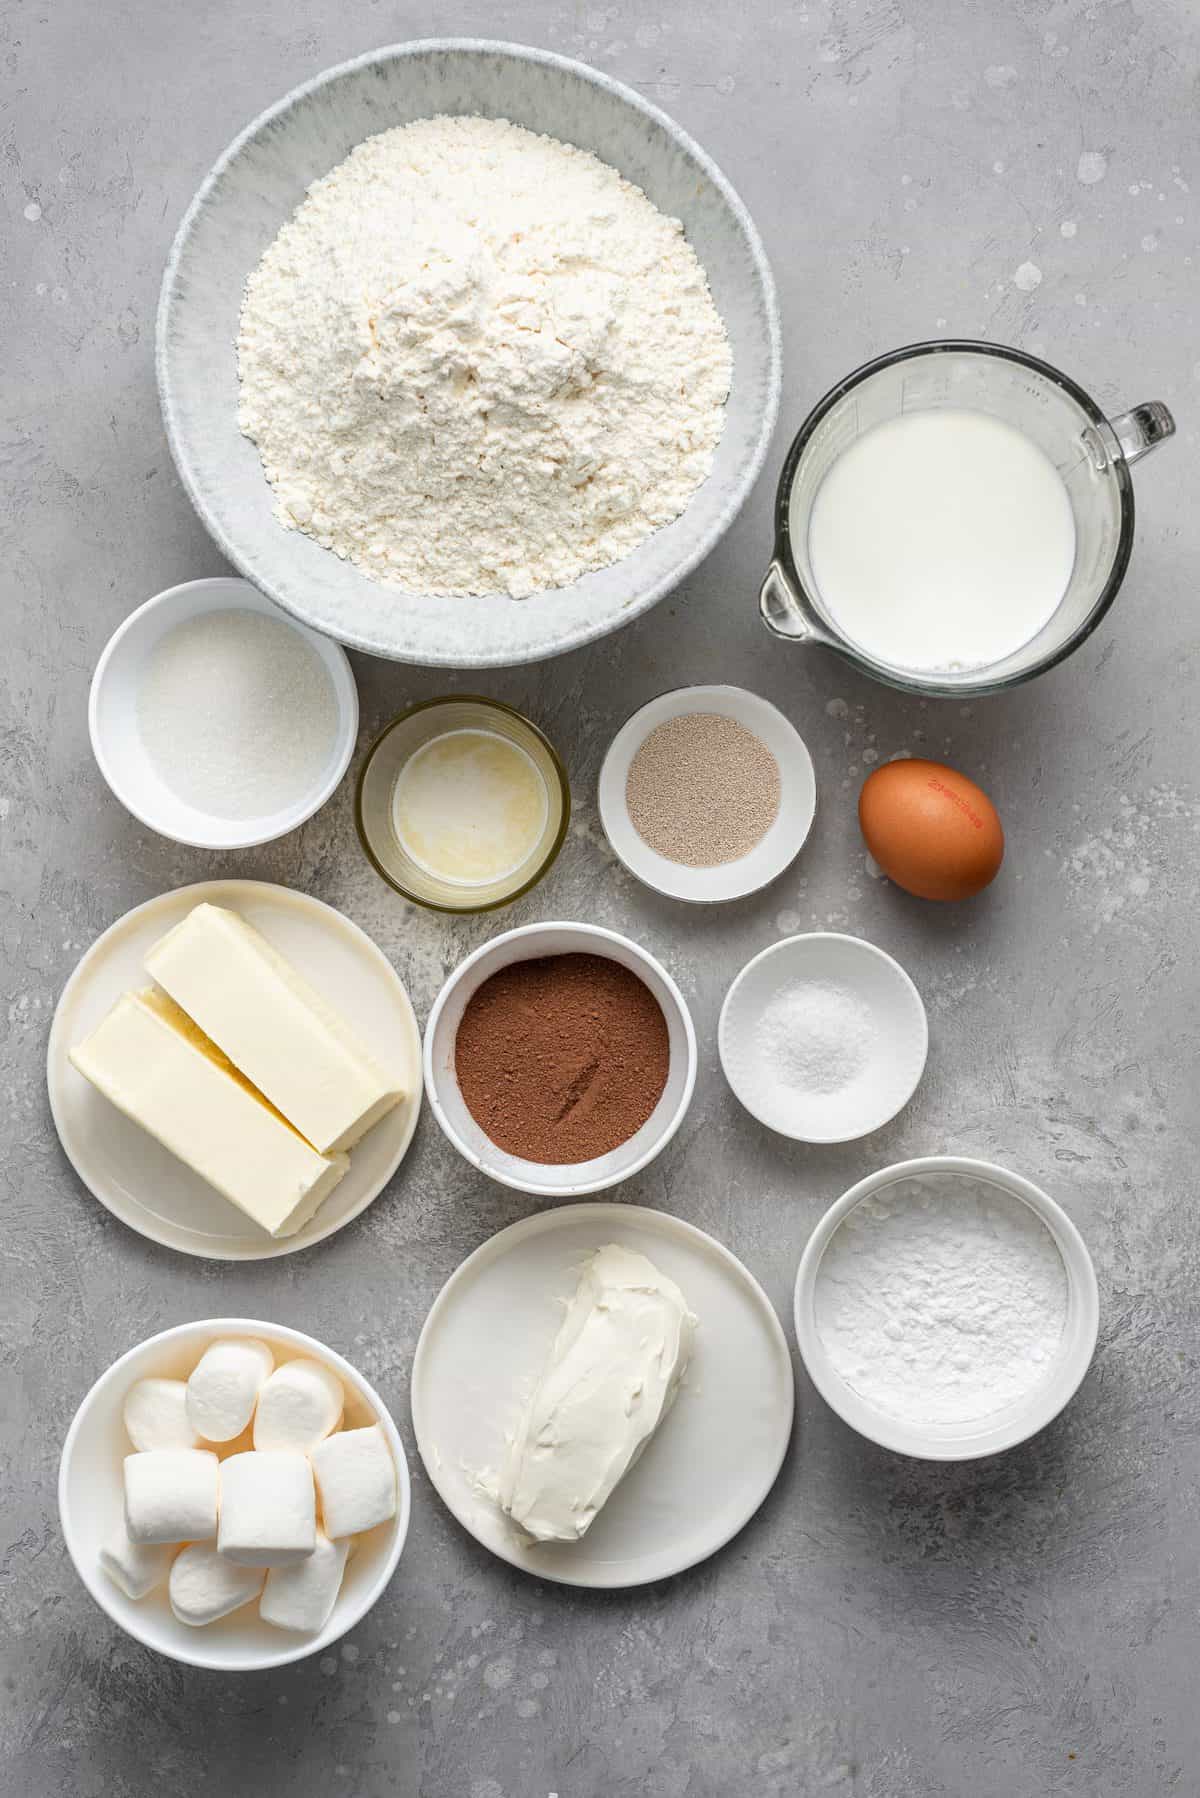 ingredients in bowls and plates to make hot chocolate cinnamon rolls